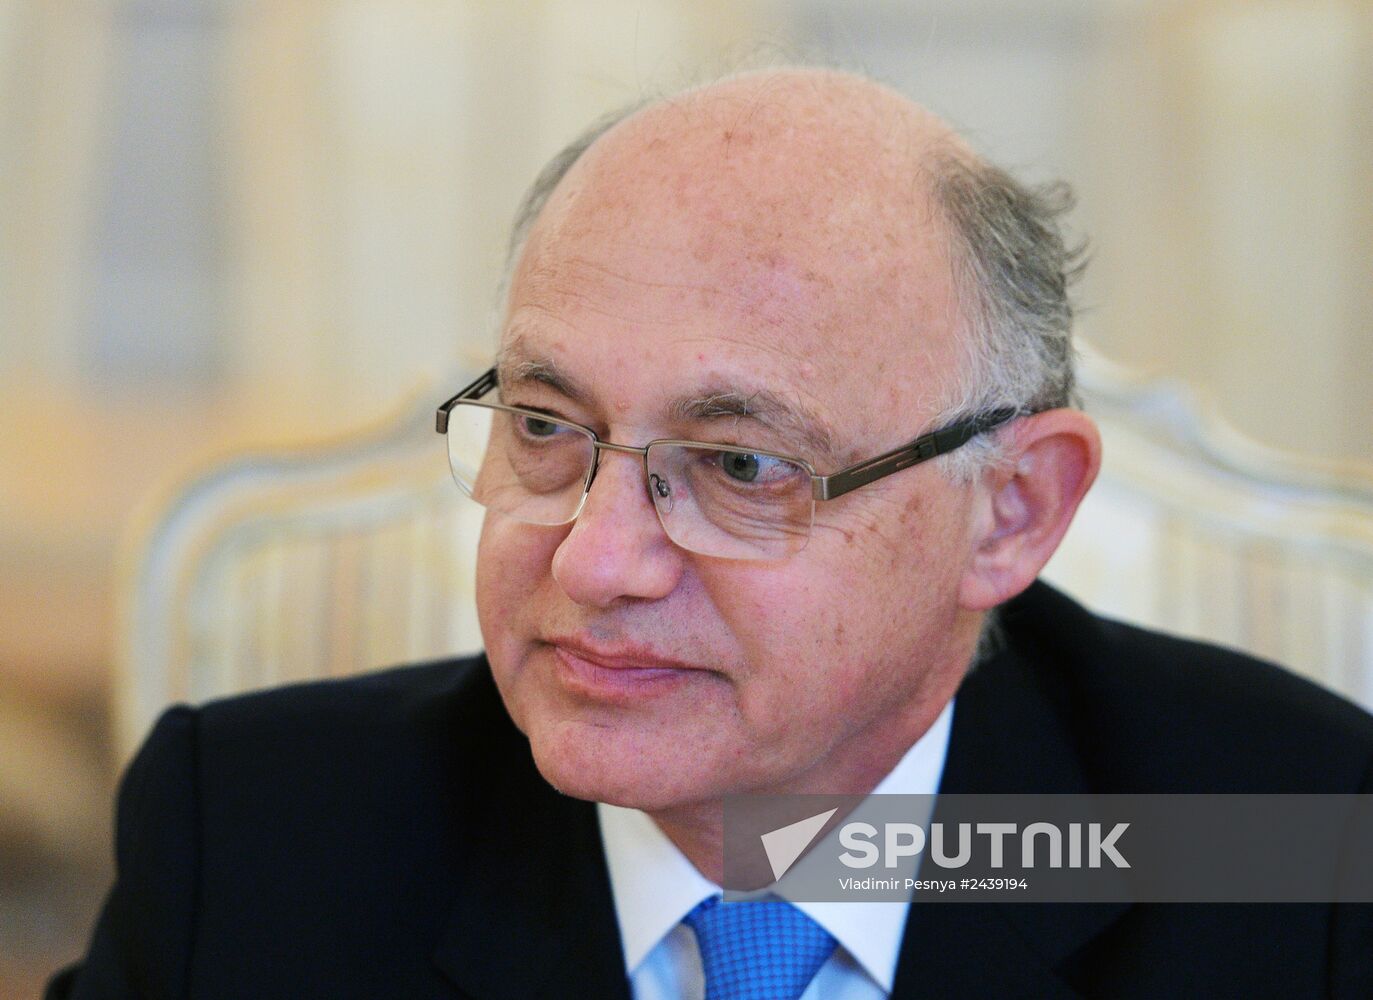 Sergey Lavrov meets with Foreign Minister of Argentina Héctor Timerman